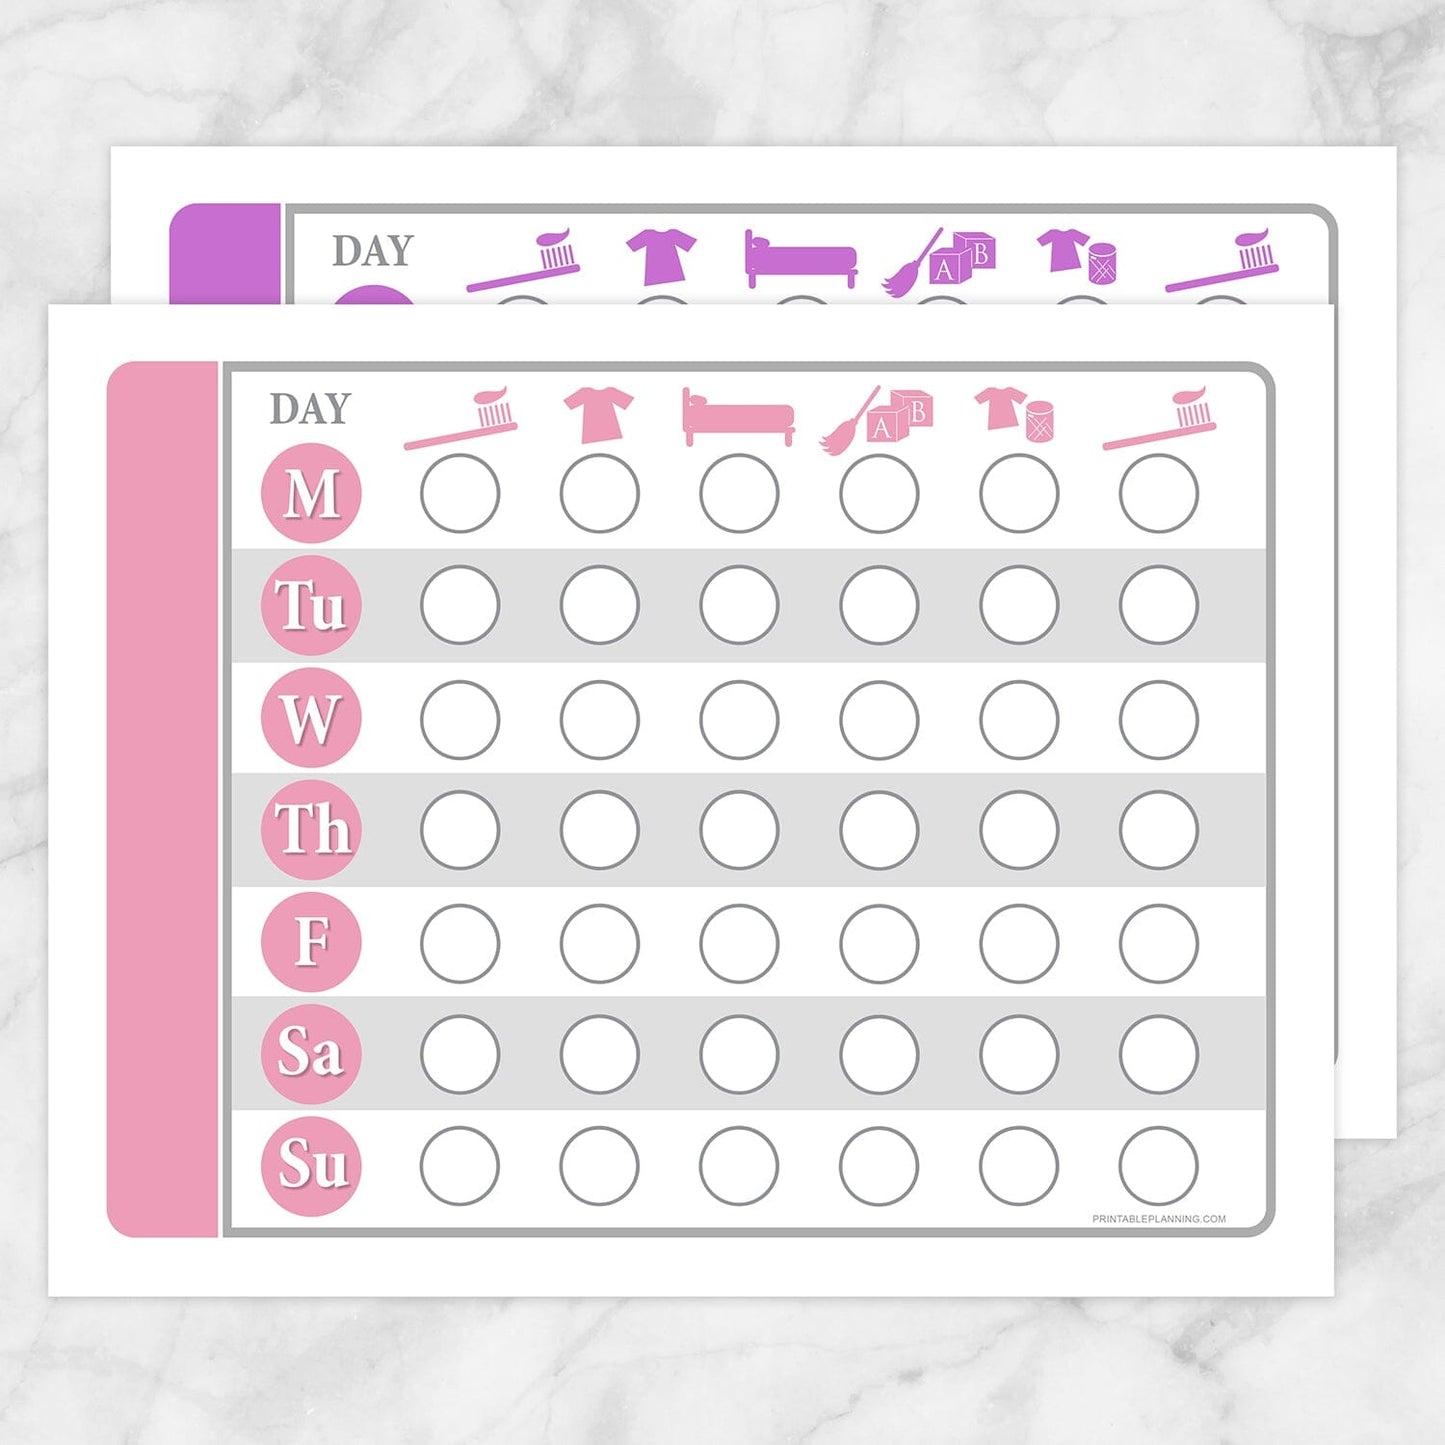 Printable Toddler Chore Chart BUNDLE - Pink Purple Daily Routine Weekly Pages at Printable Planning.